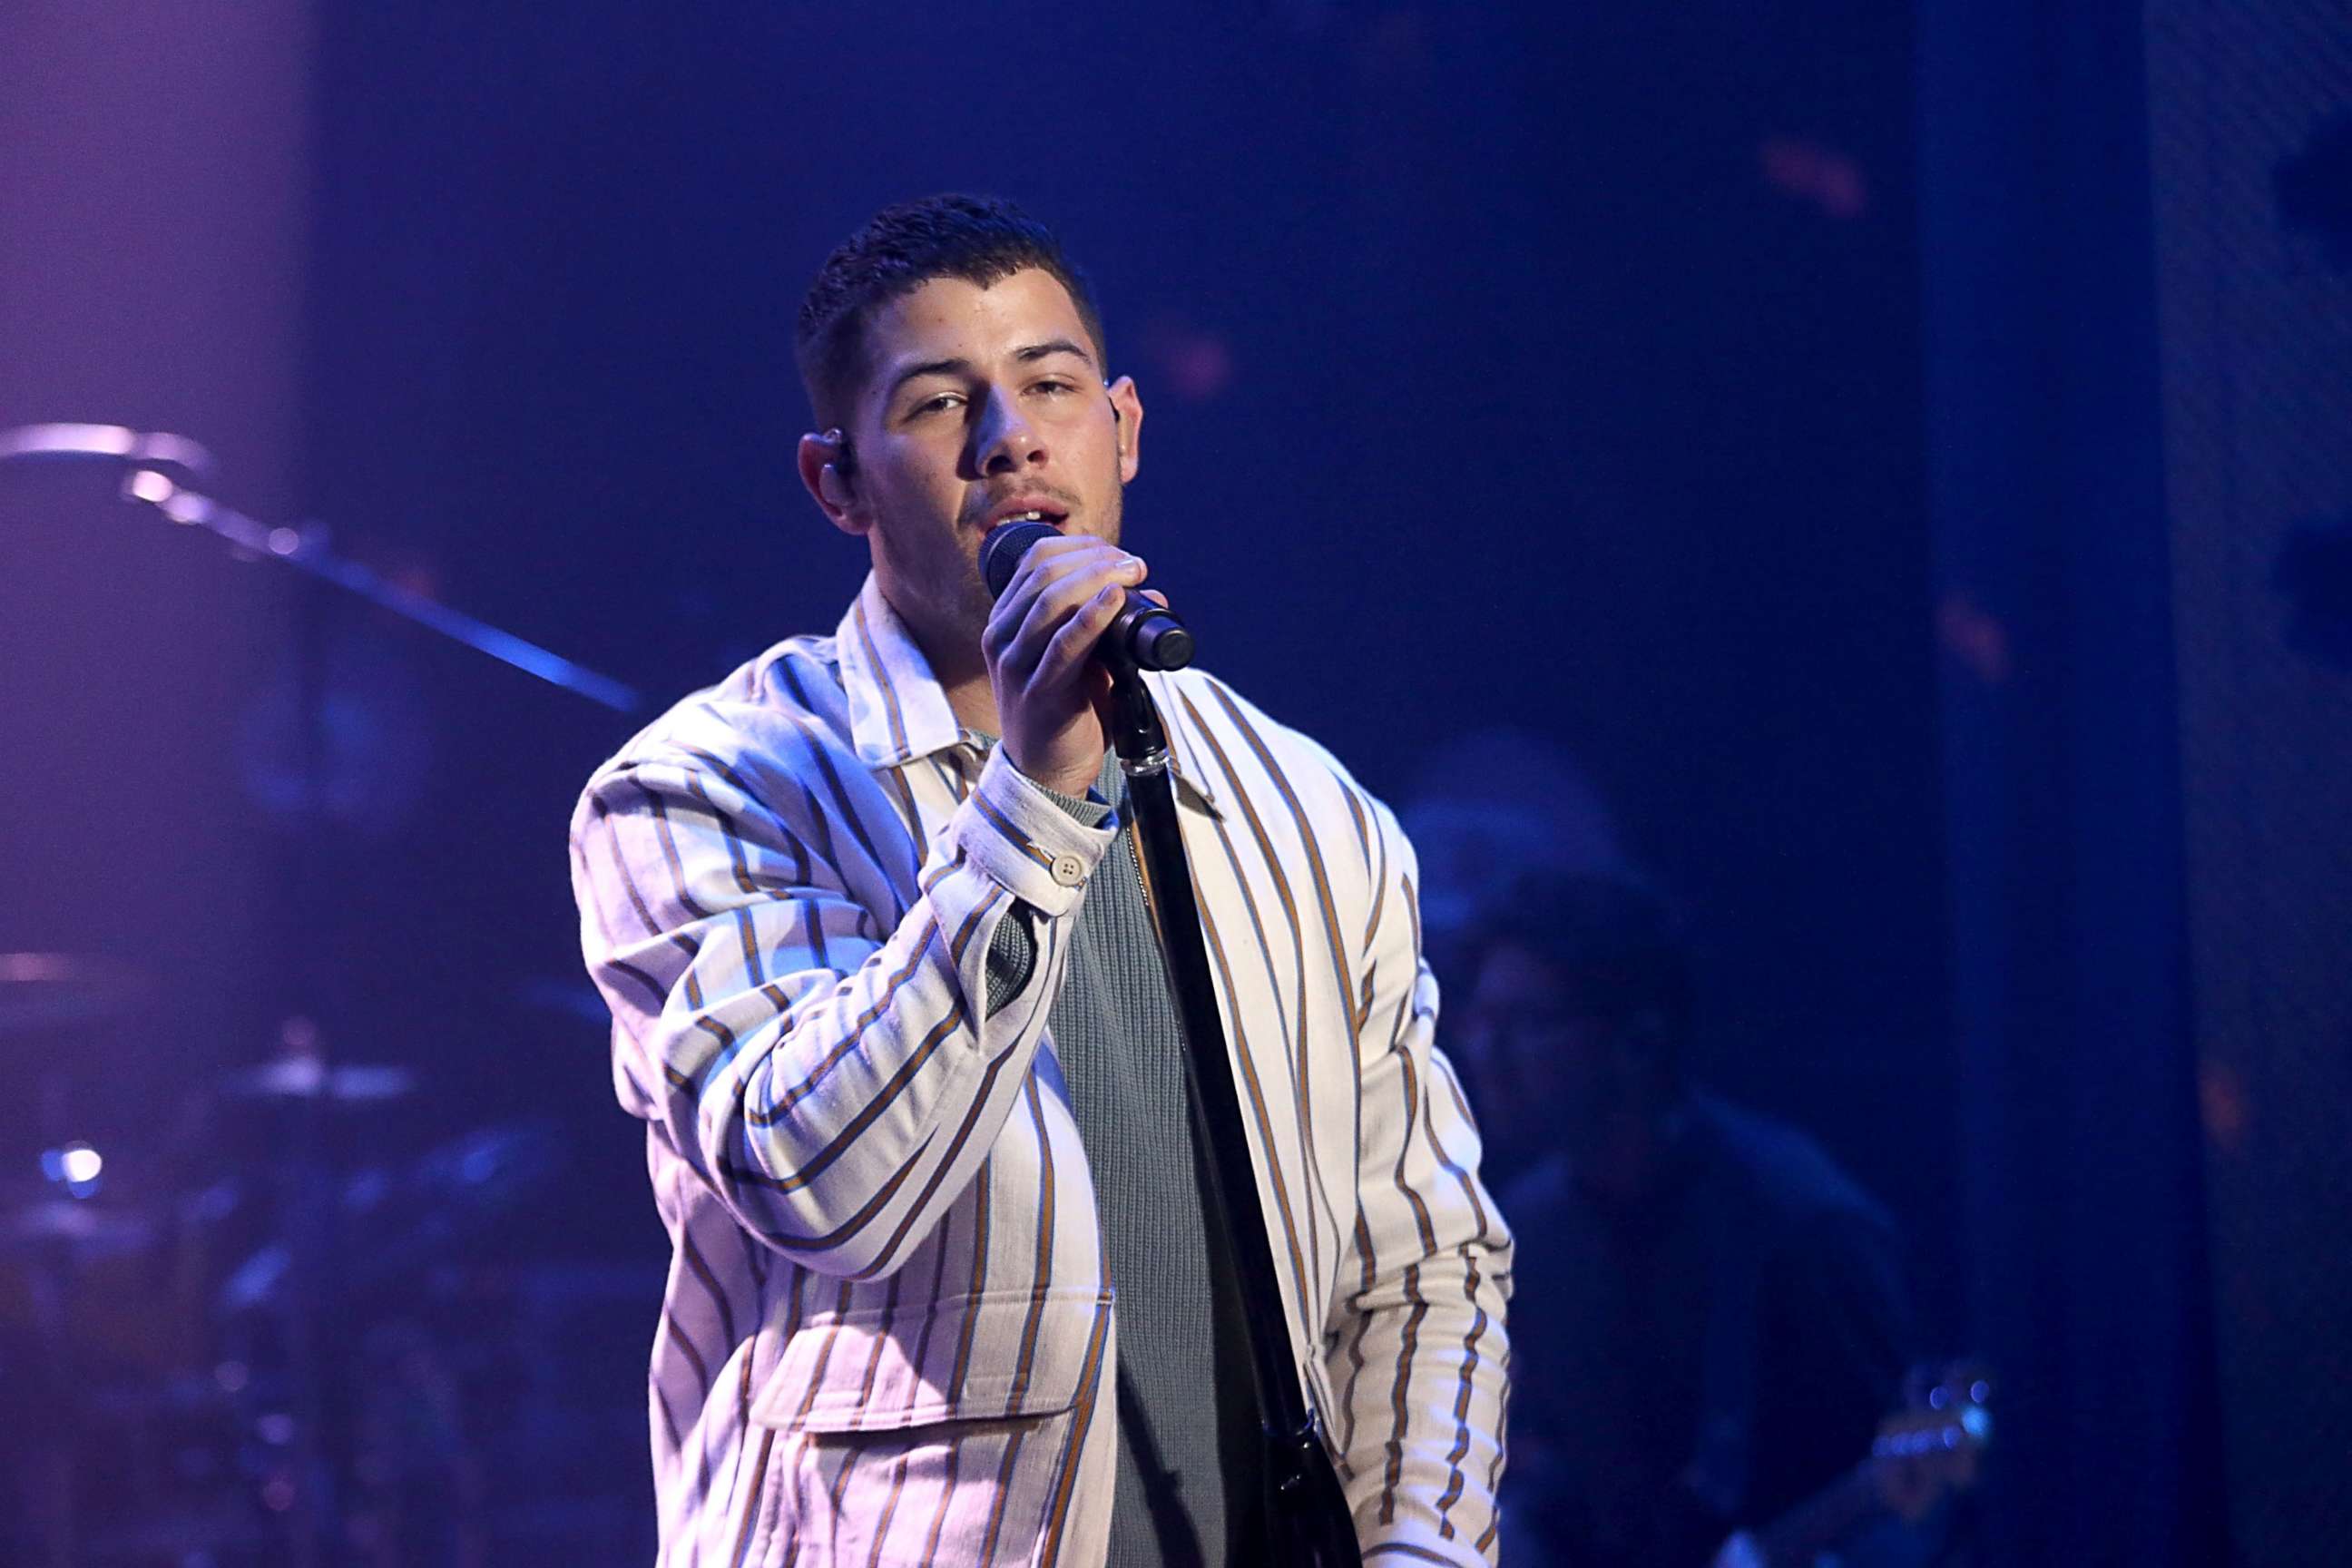 PHOTO: Nick Jonas performs in concert aboard the cruise ship Carnival Liberty, Nov. 16, 2017 in Cape Canaveral, Florida.  